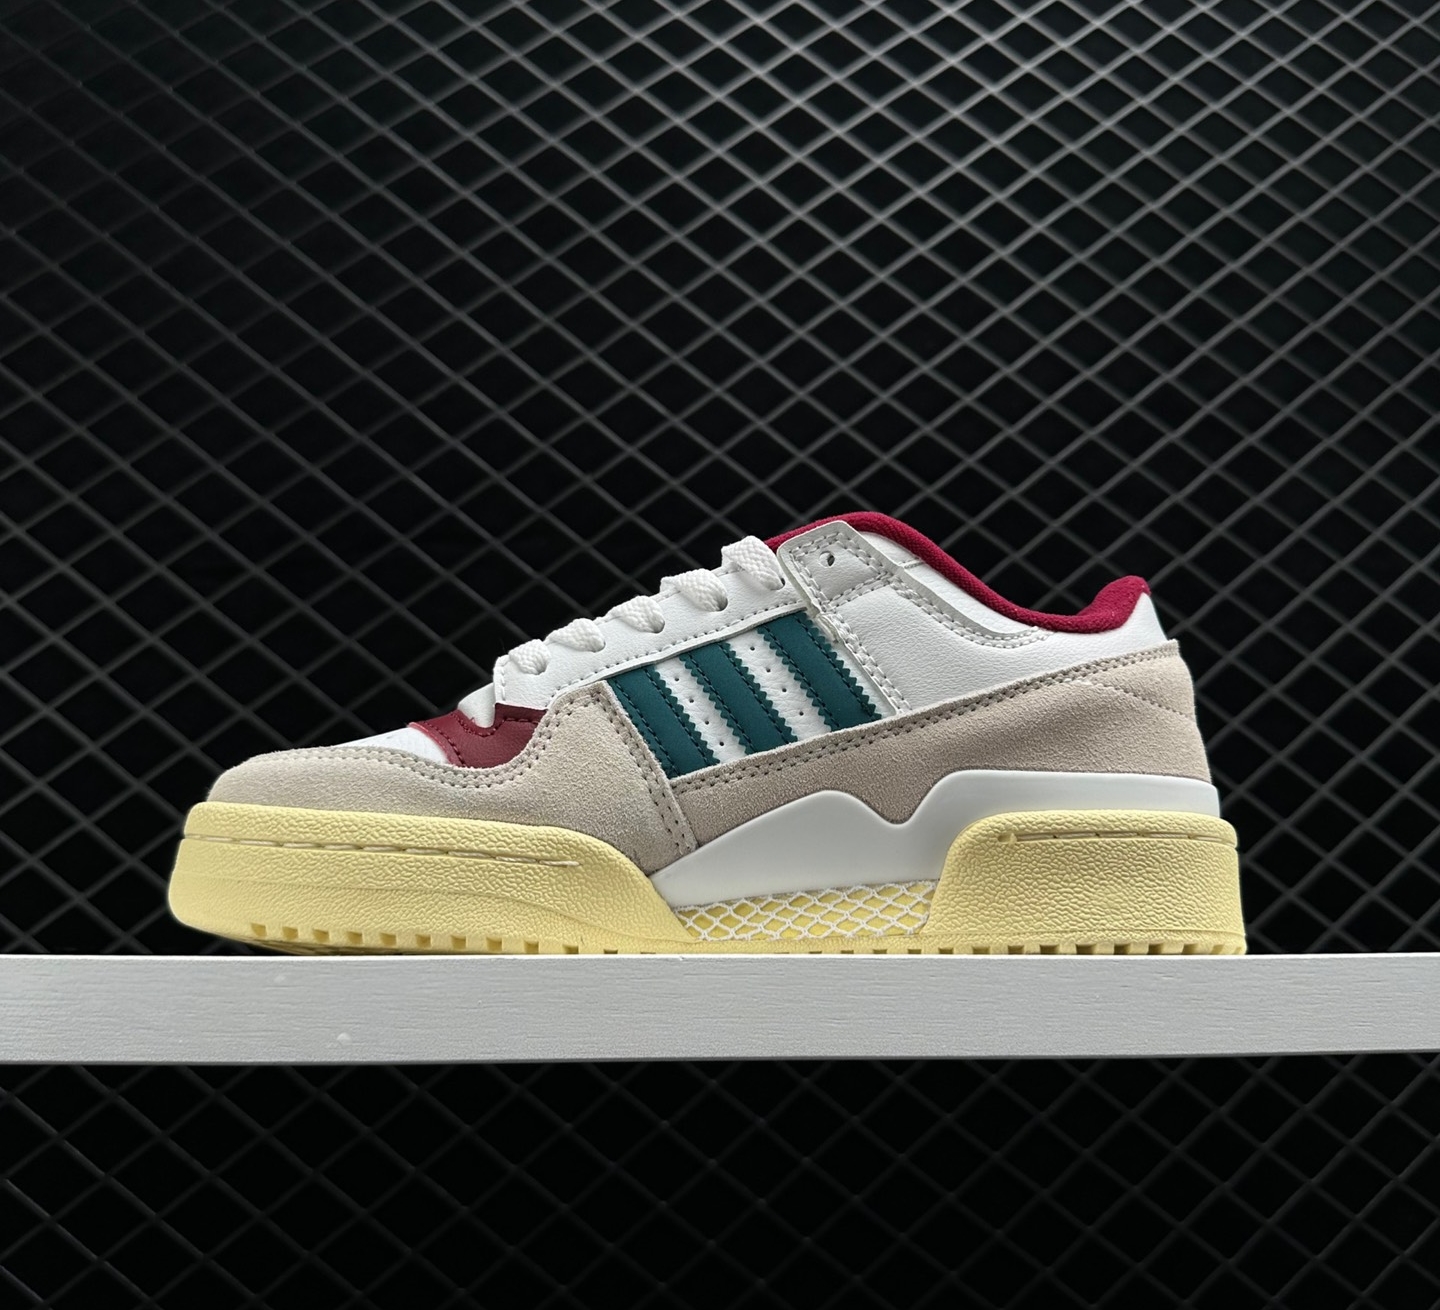 Adidas Forum Low CL White Legacy Teal - HQ6874 | Stylish Sneaker for Every Outfit